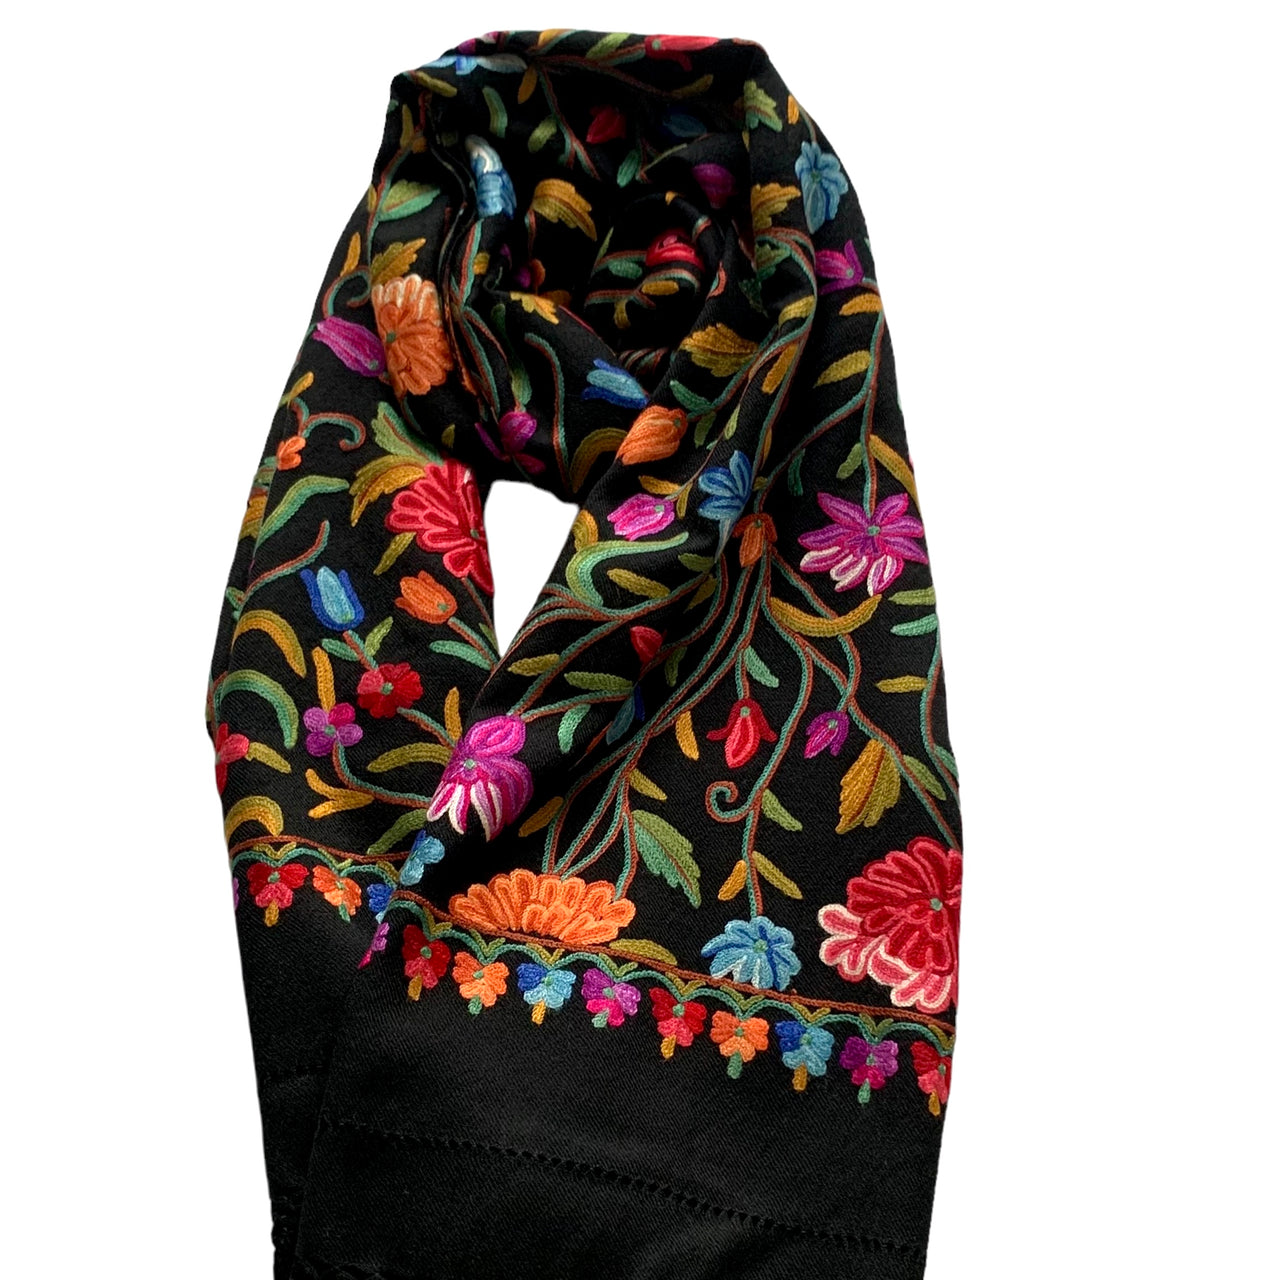 Gorgeous black hand Embroidered  wool Floral Scarf Shawl Stole Wrap